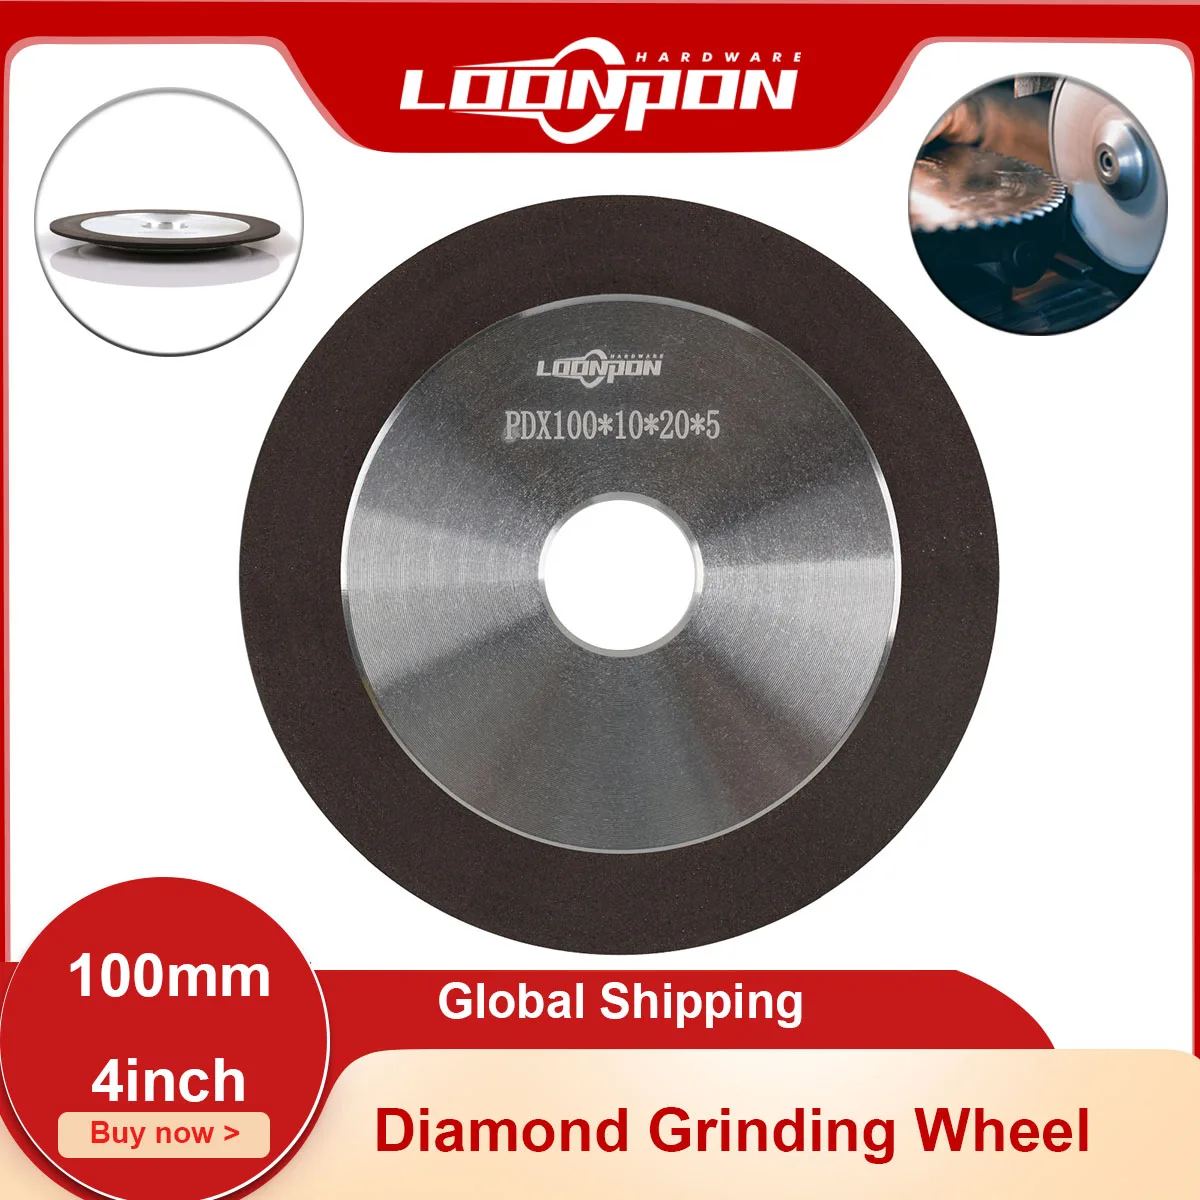 100mm/4inch Diamond Grinding Wheel Grinding Circle Grit 150 for Tungsten Steel Milling Cutter Tool Sharpener Grinder m14 to m10 or m14 to 5 8 11 or 5 8 11 adapter different thread diamond core bits drill grinder cutter to m14 for angle grinder